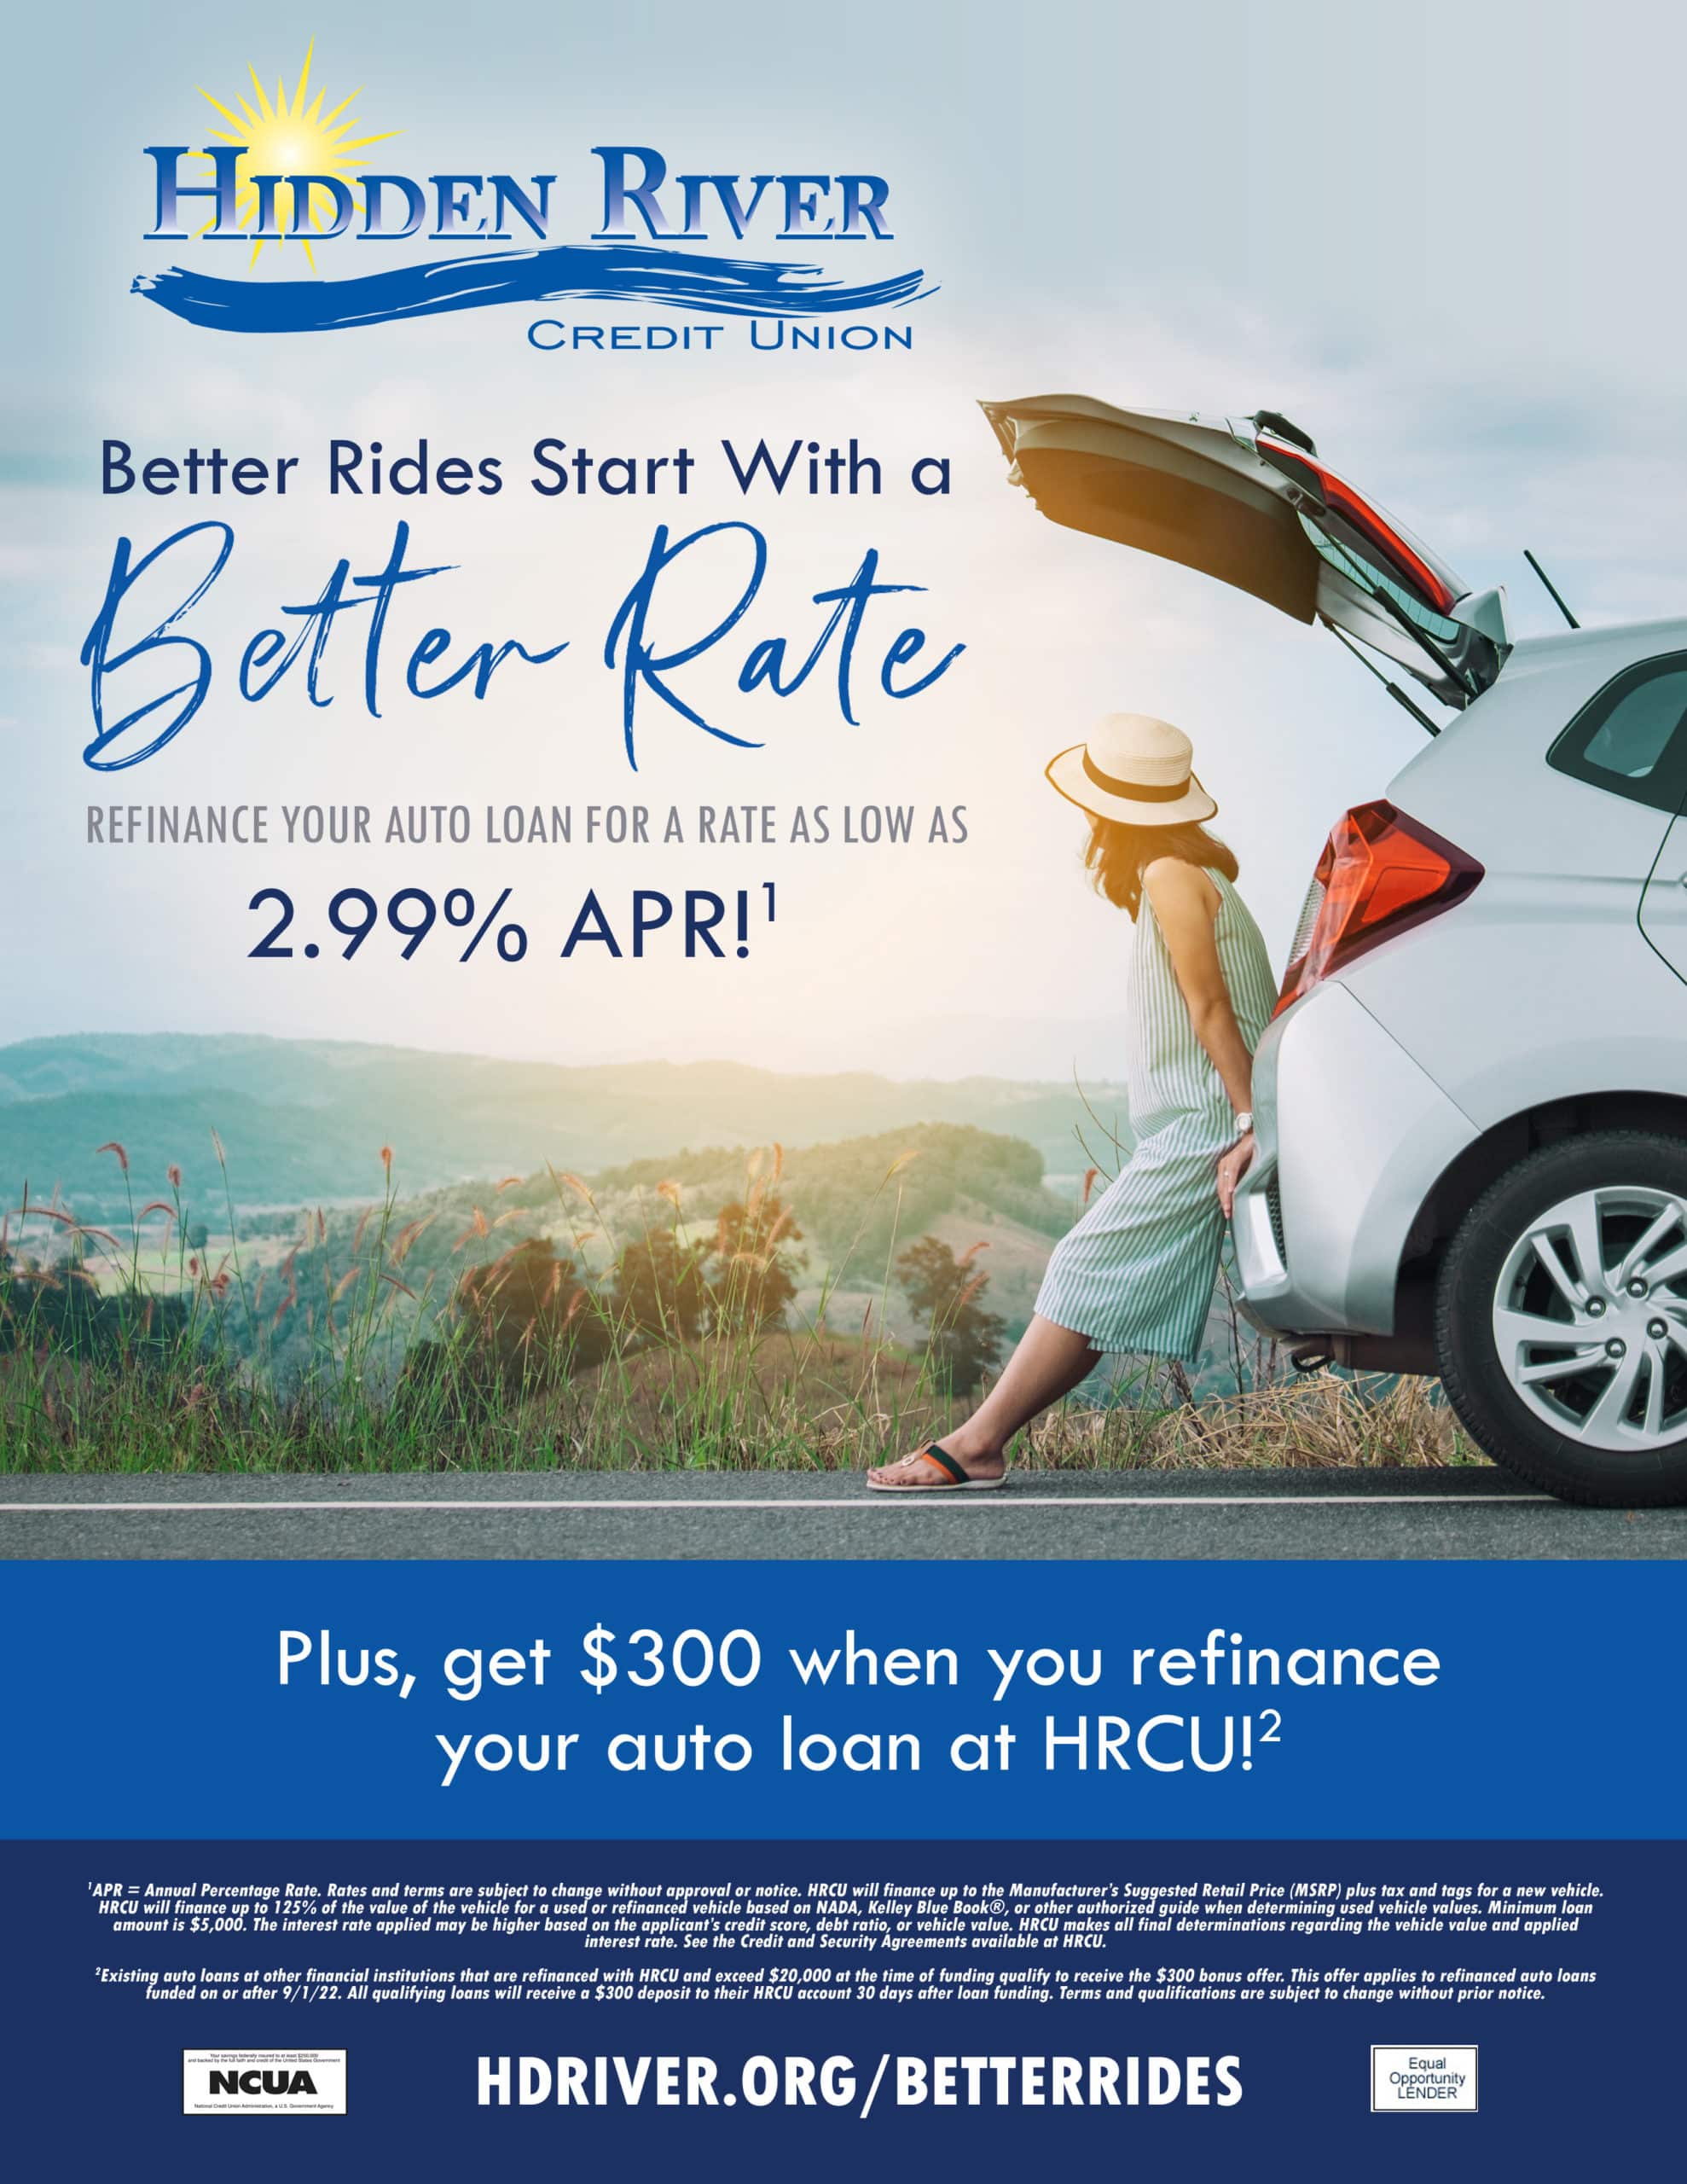 woman leaning against car looking towards sunset with mountain background. Includes text "Better Rides Start with a Better Rate" Refinance your auto loan for rates as low as 2.99% APR."